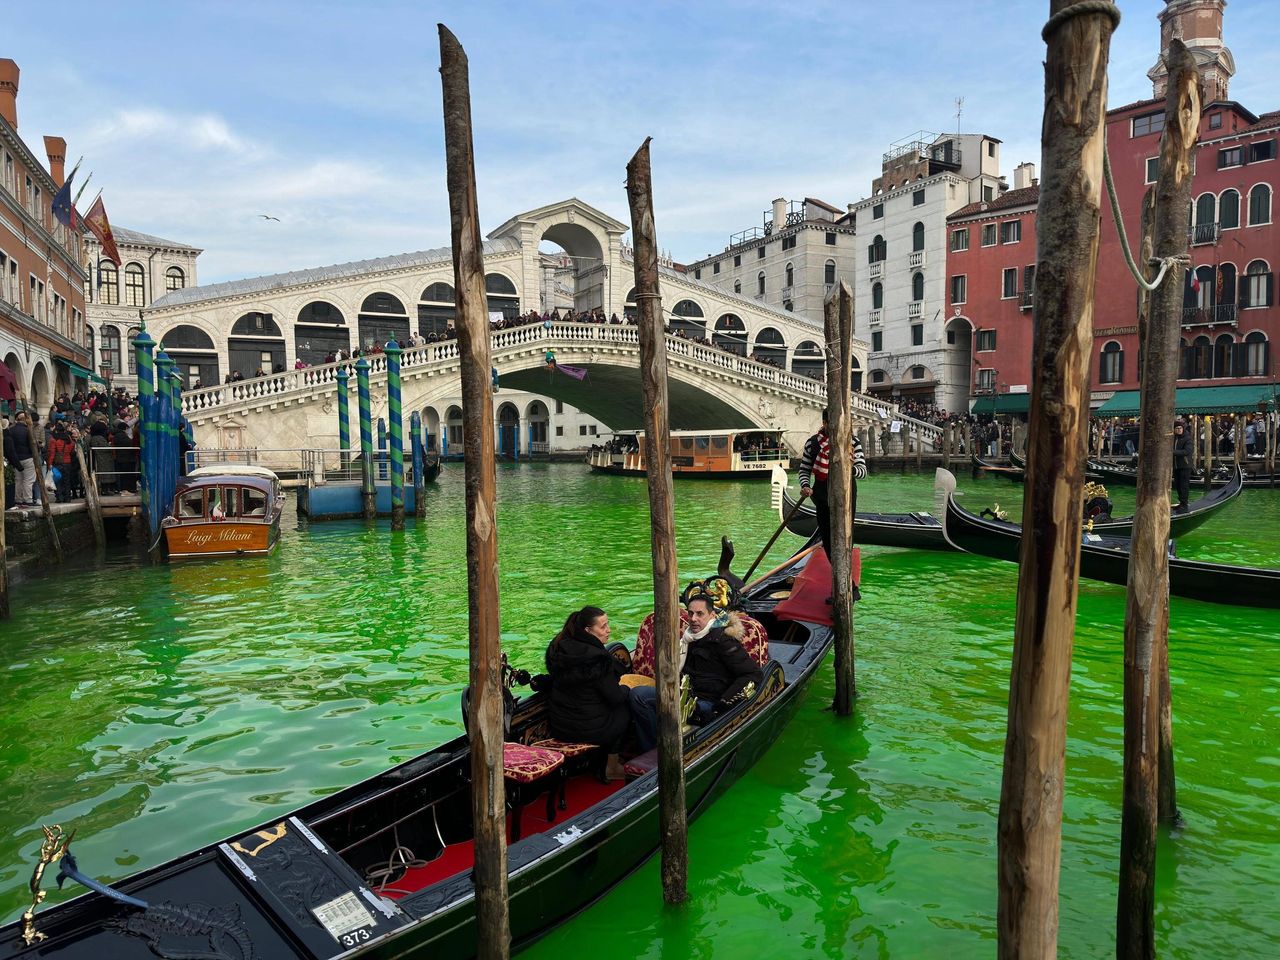 Protests continue: Rivers and canals in Italy dyed green